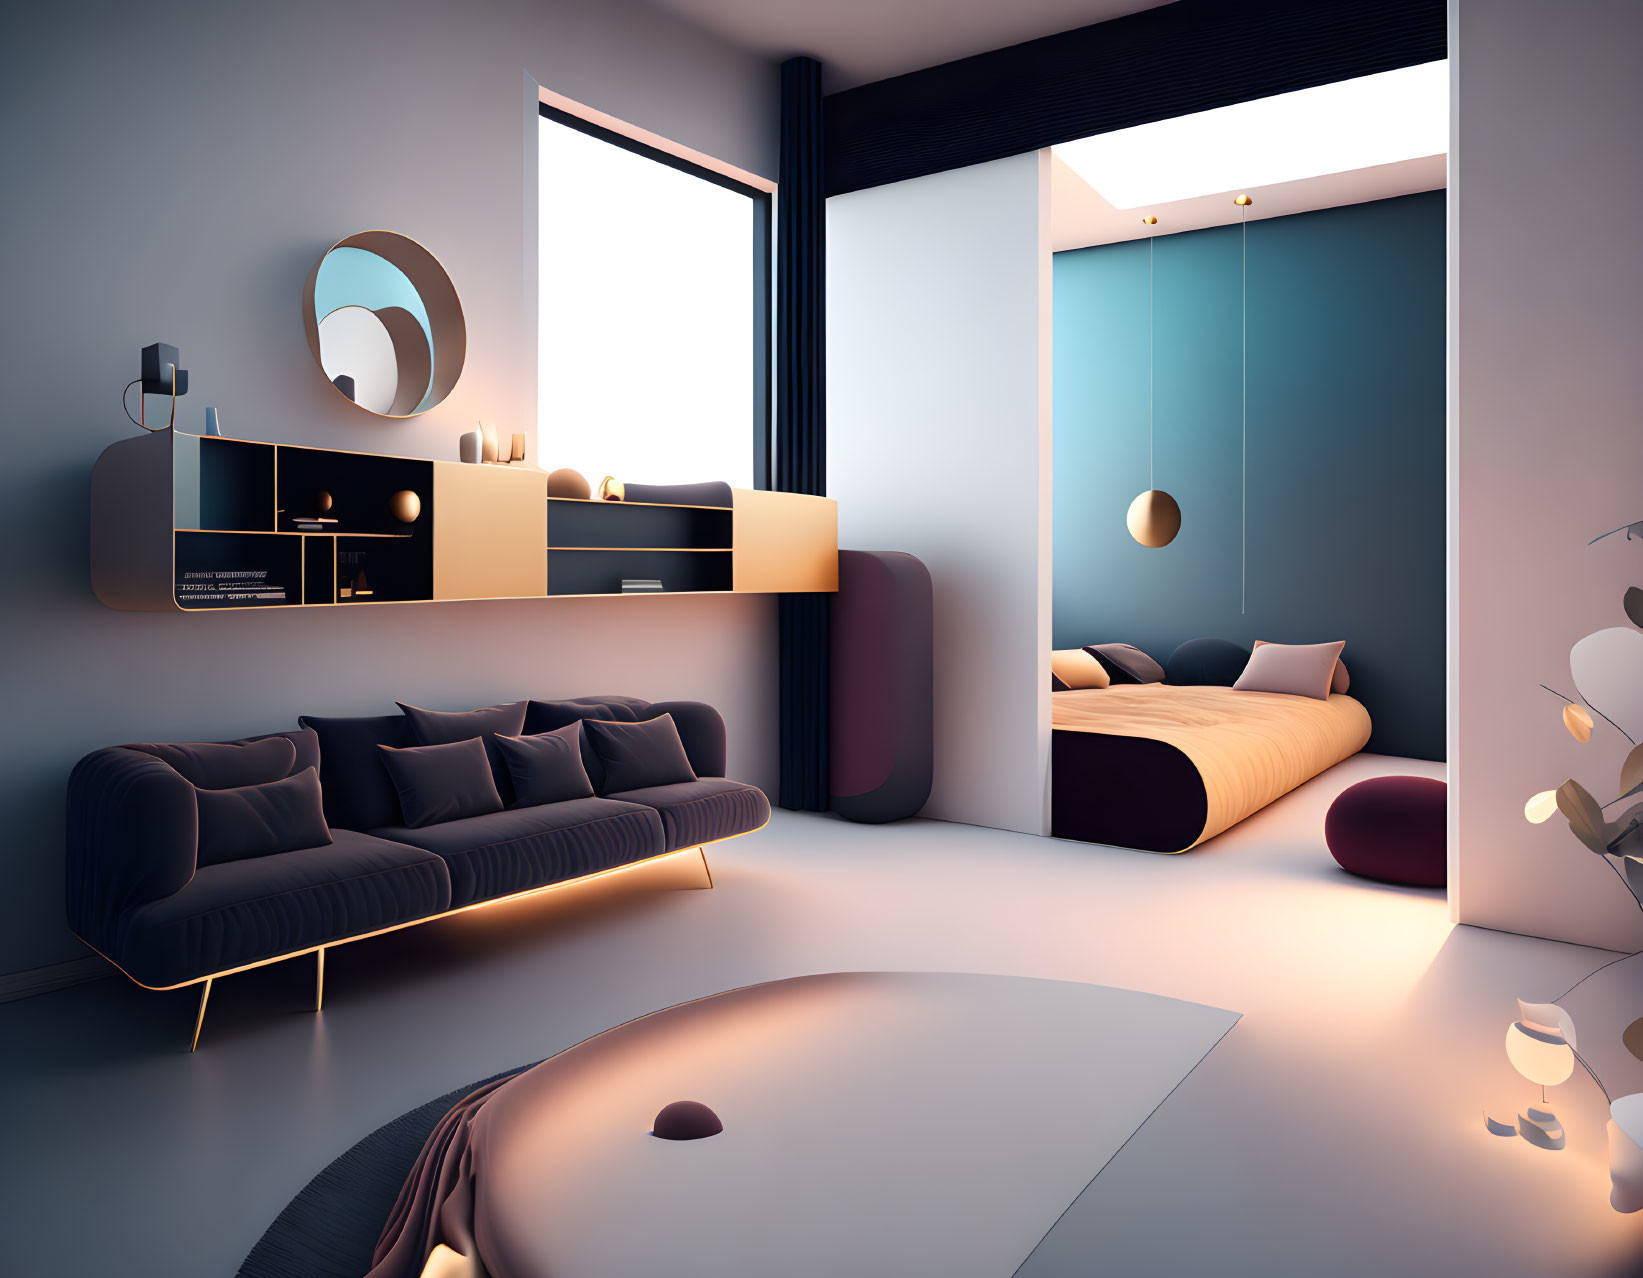 Minimalist Modern Living Room with Dark & Pastel Colors and Ambient Lighting